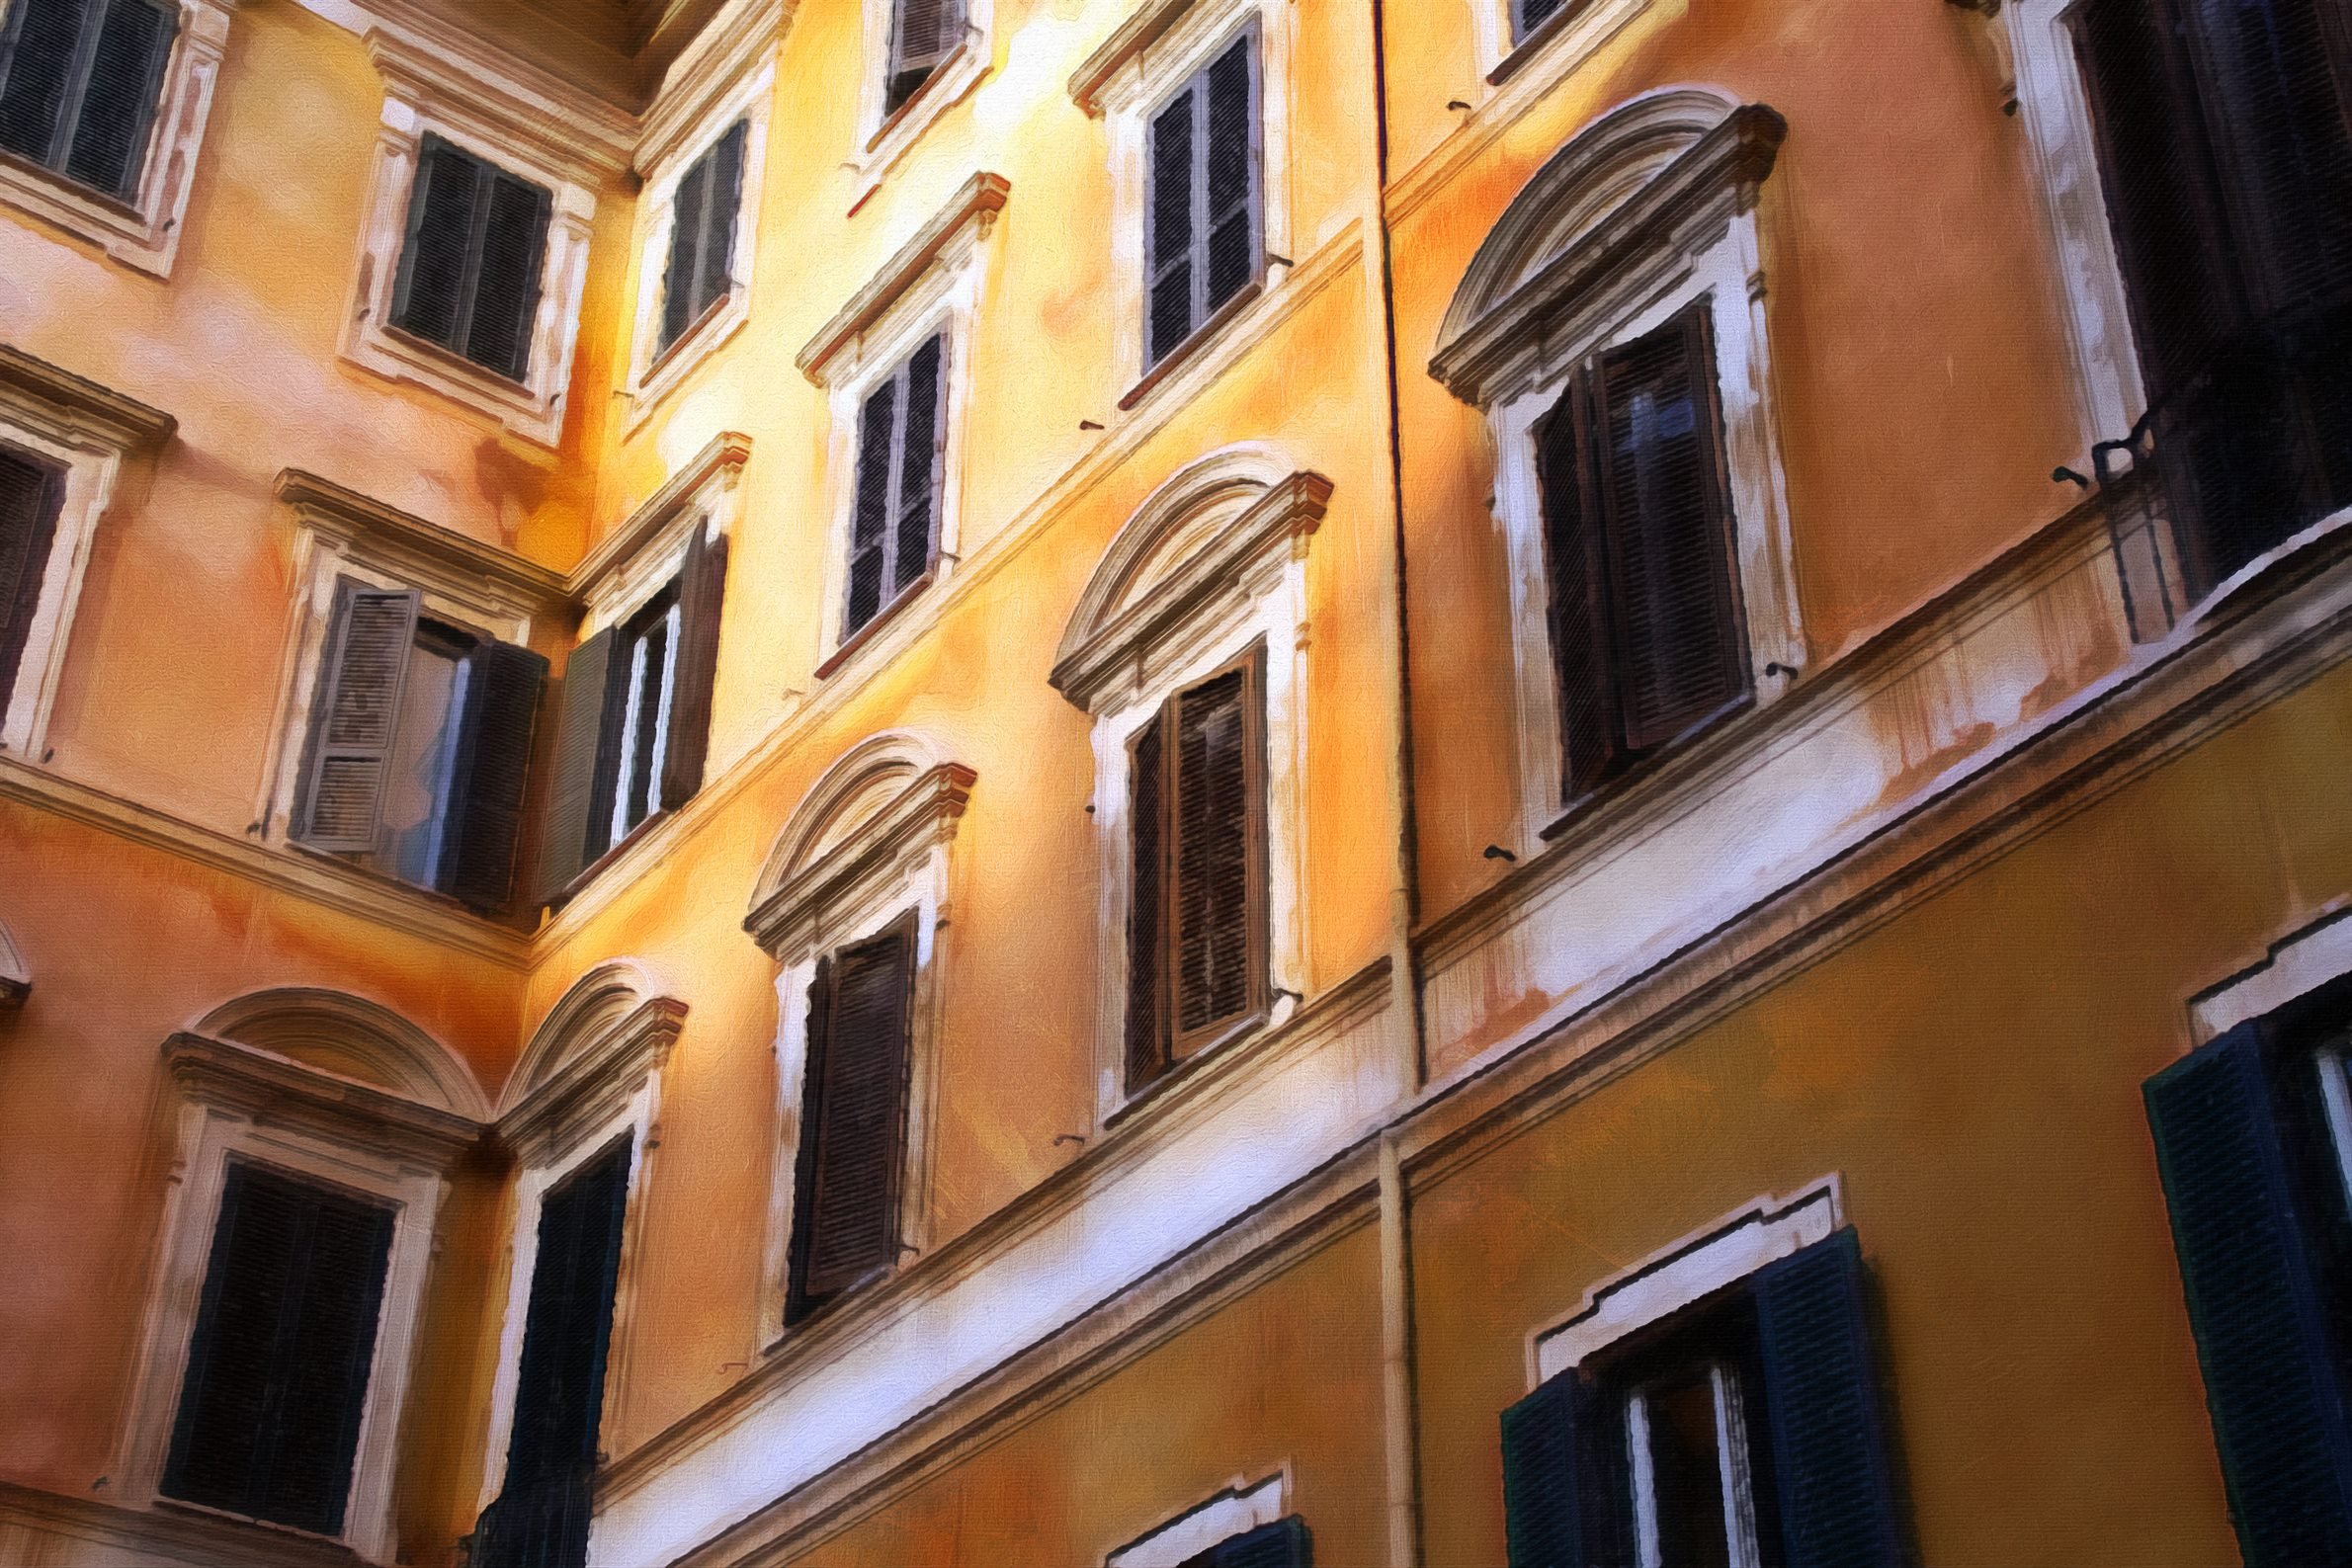 Oil Paint Photoshop Action - example 13 with yellow building.